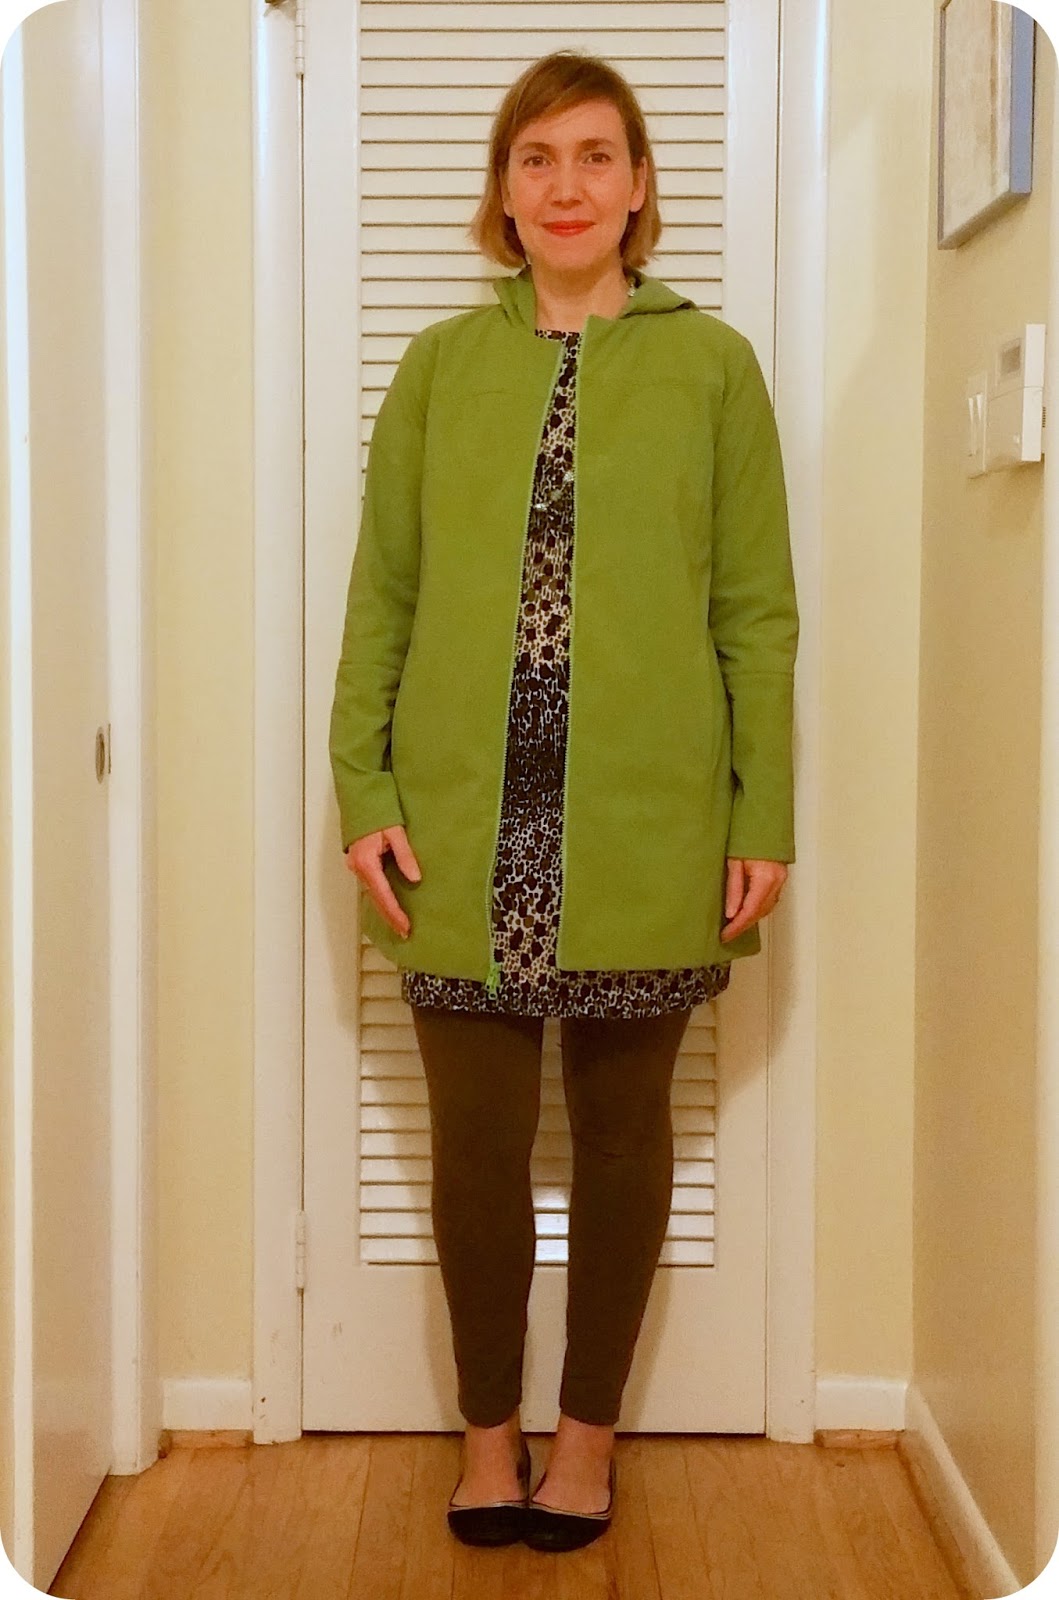 Made by a Fabricista: Parrot Green Jalie City Coat.